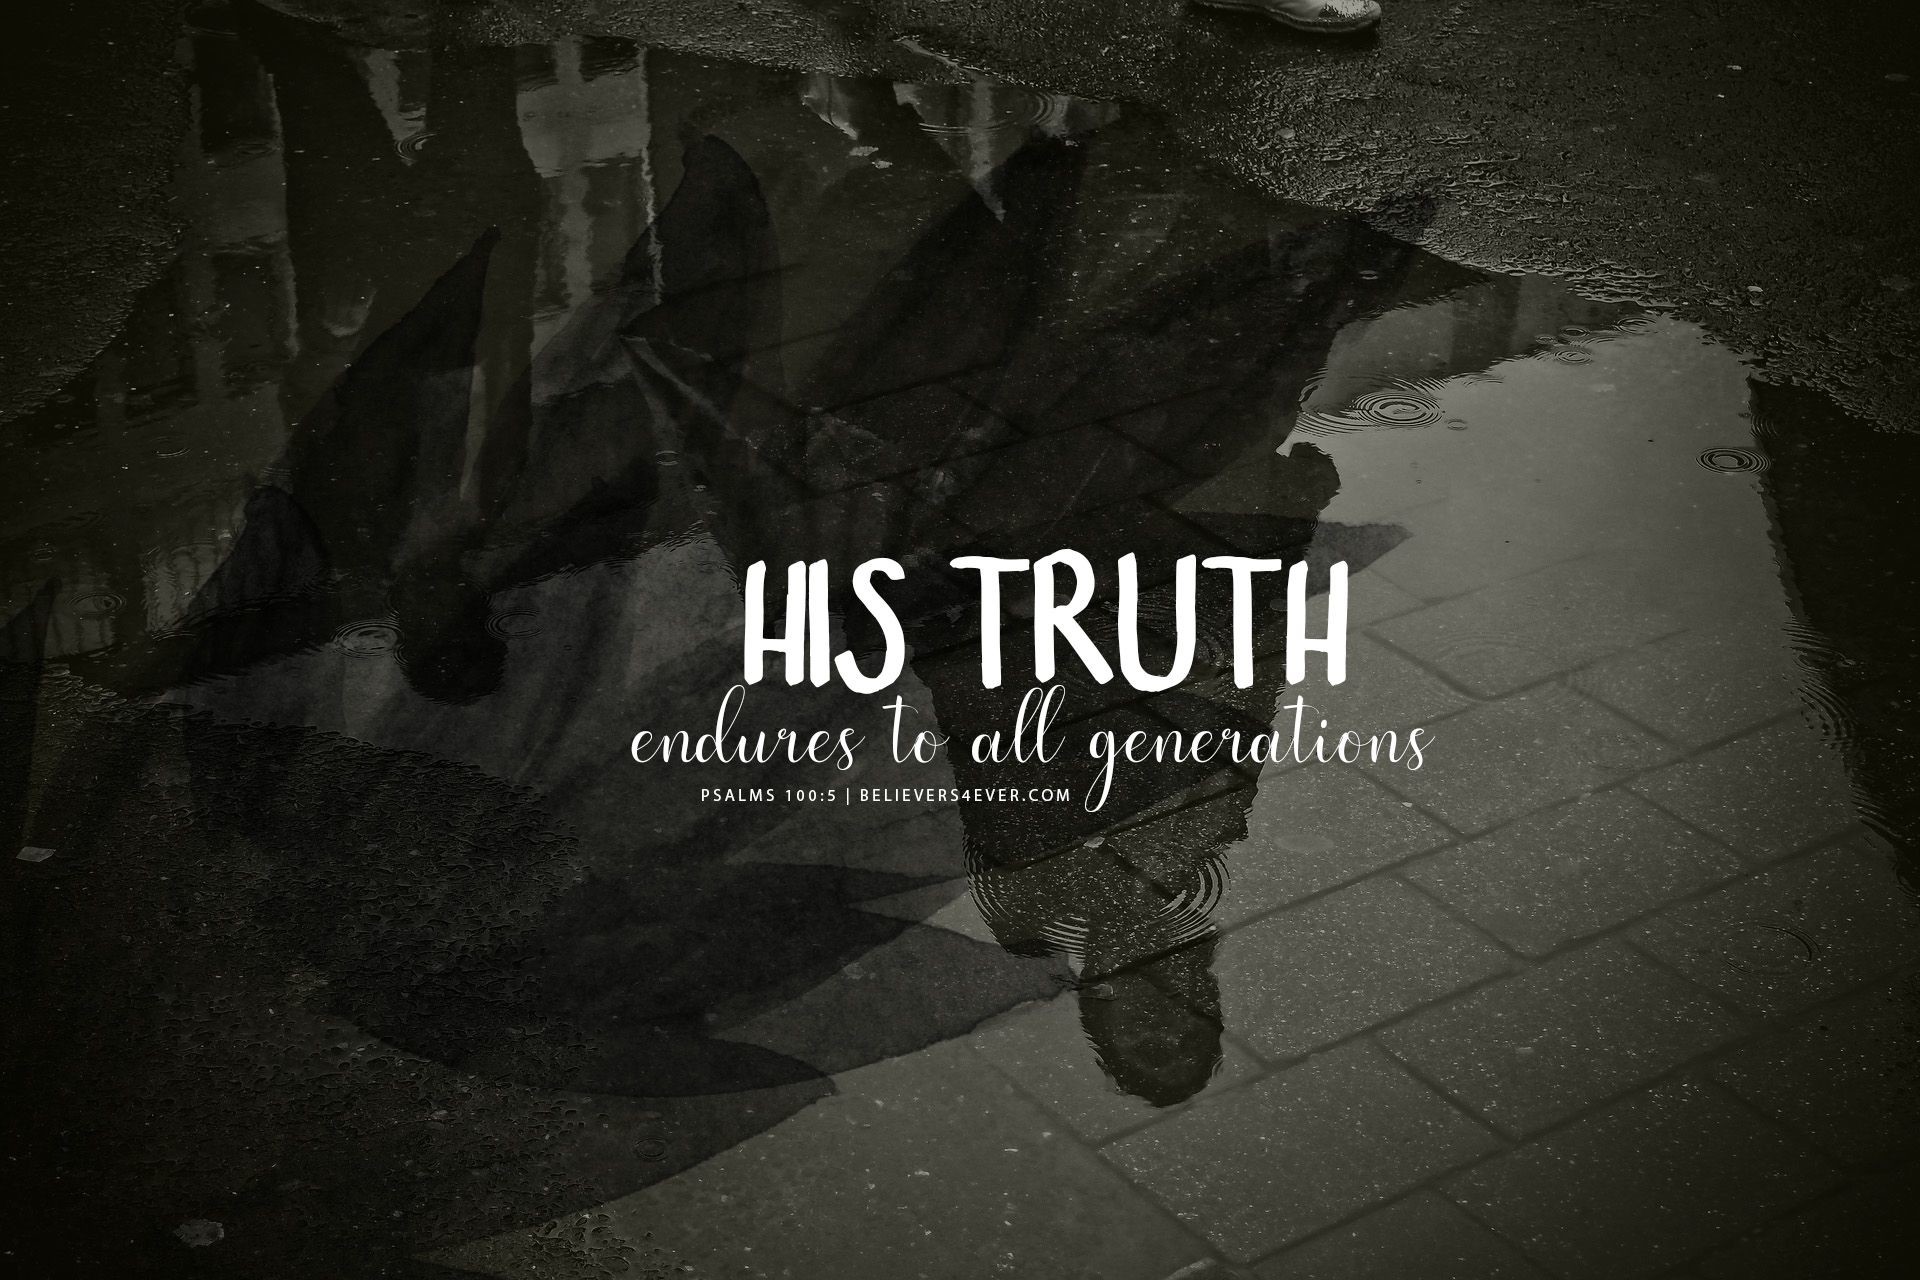 1920x1280, His Truth Endures To All Generations - Desktop Backgrounds Christian - HD Wallpaper 